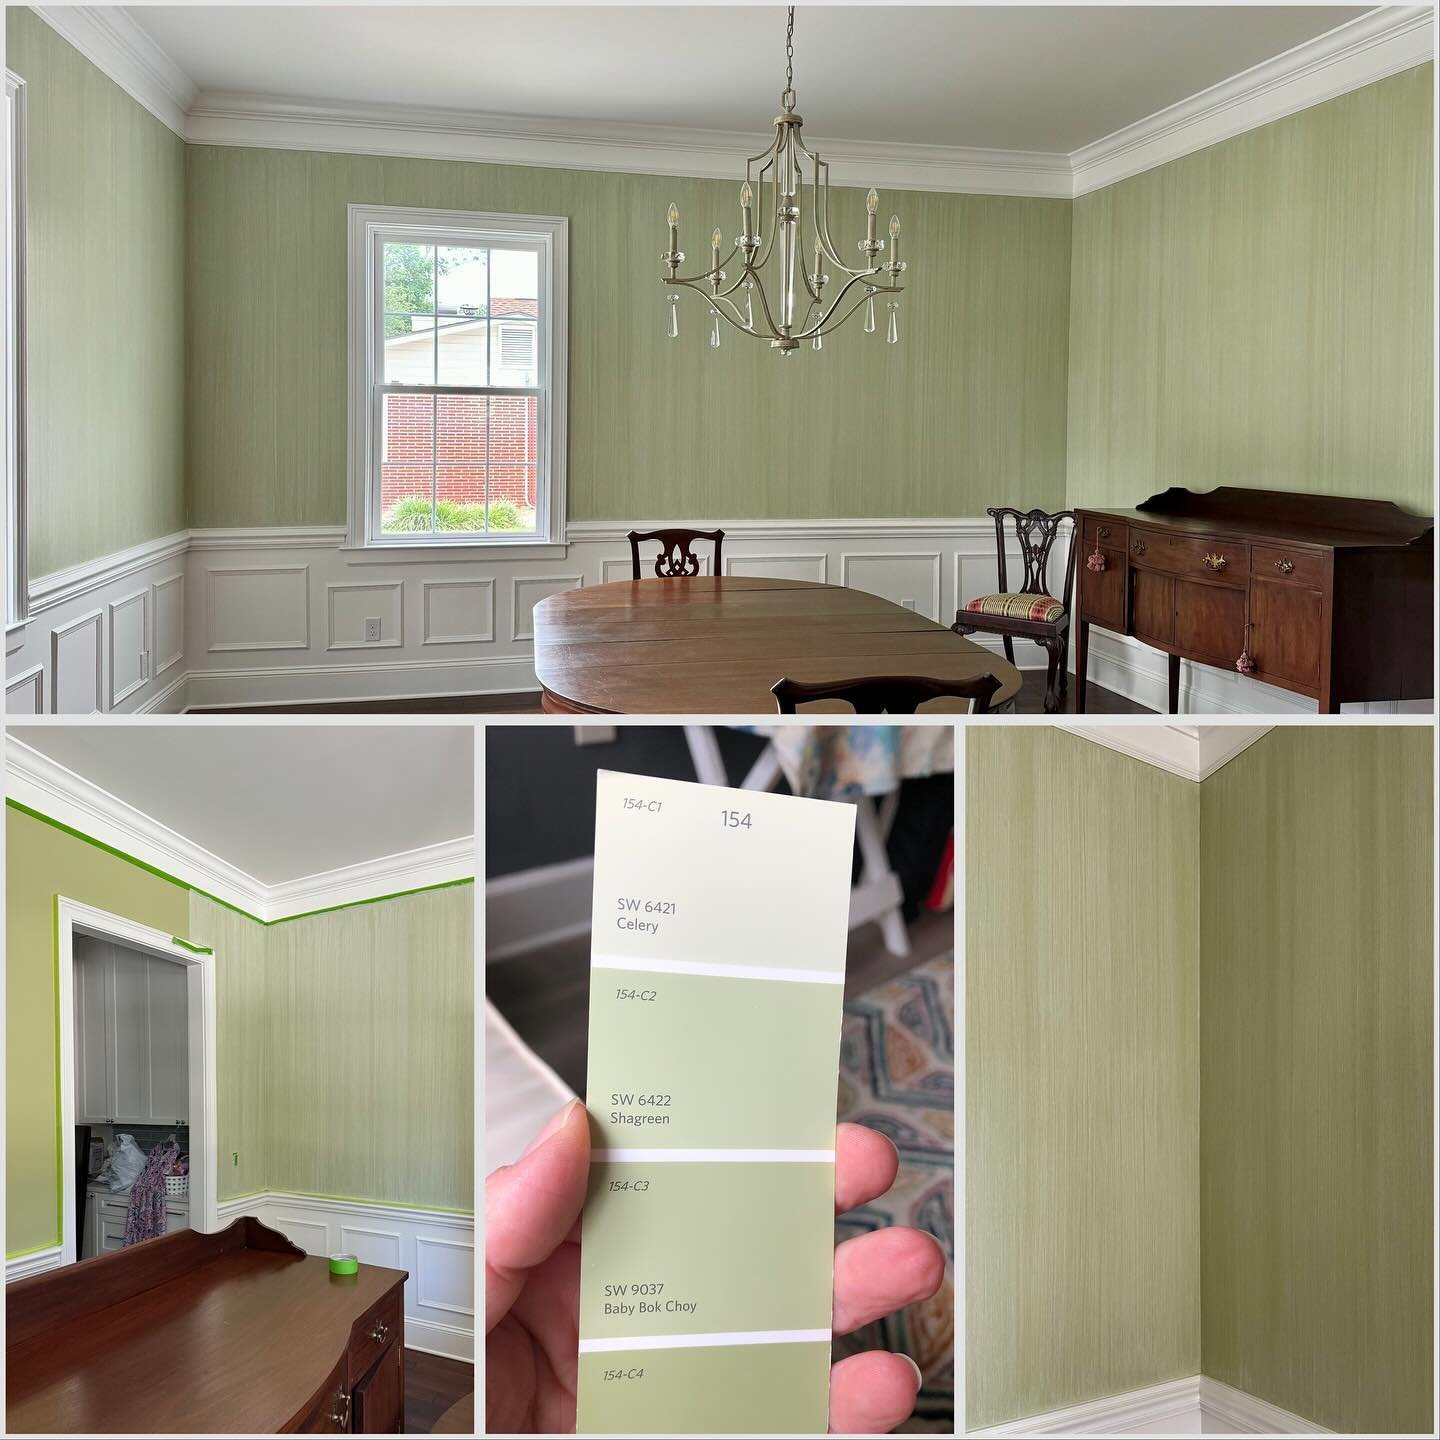 💚 
Last week I faux finished this beautiful dining room with an elegant strie finish. This particular finish perfectly mimics the highly-coveted (and very expensive!) look of grass cloth wallpaper. The bottom left pic shows a progress shot of before